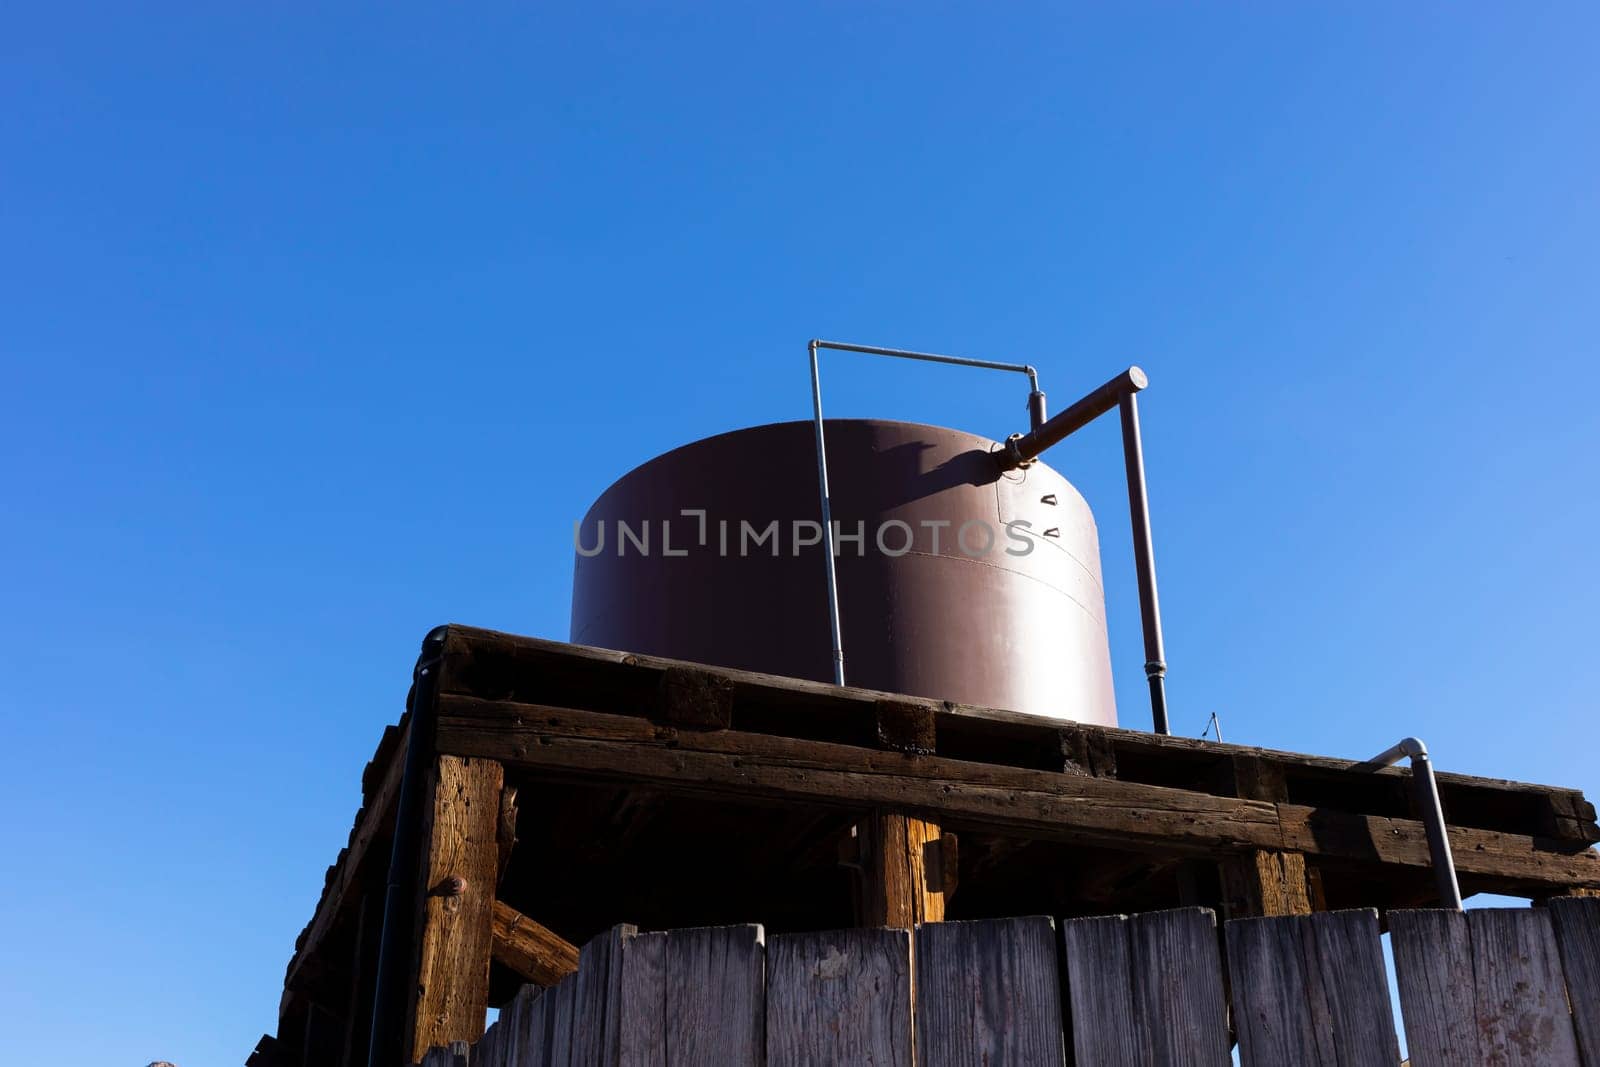 Water Tank, Barrel For Heating Under Sun On Workshop Building Outdoor at Countryside. Hot Water For Summer Cottage or Agriculture. Blue Sky on Background. Horizontal Plane. High quality photo